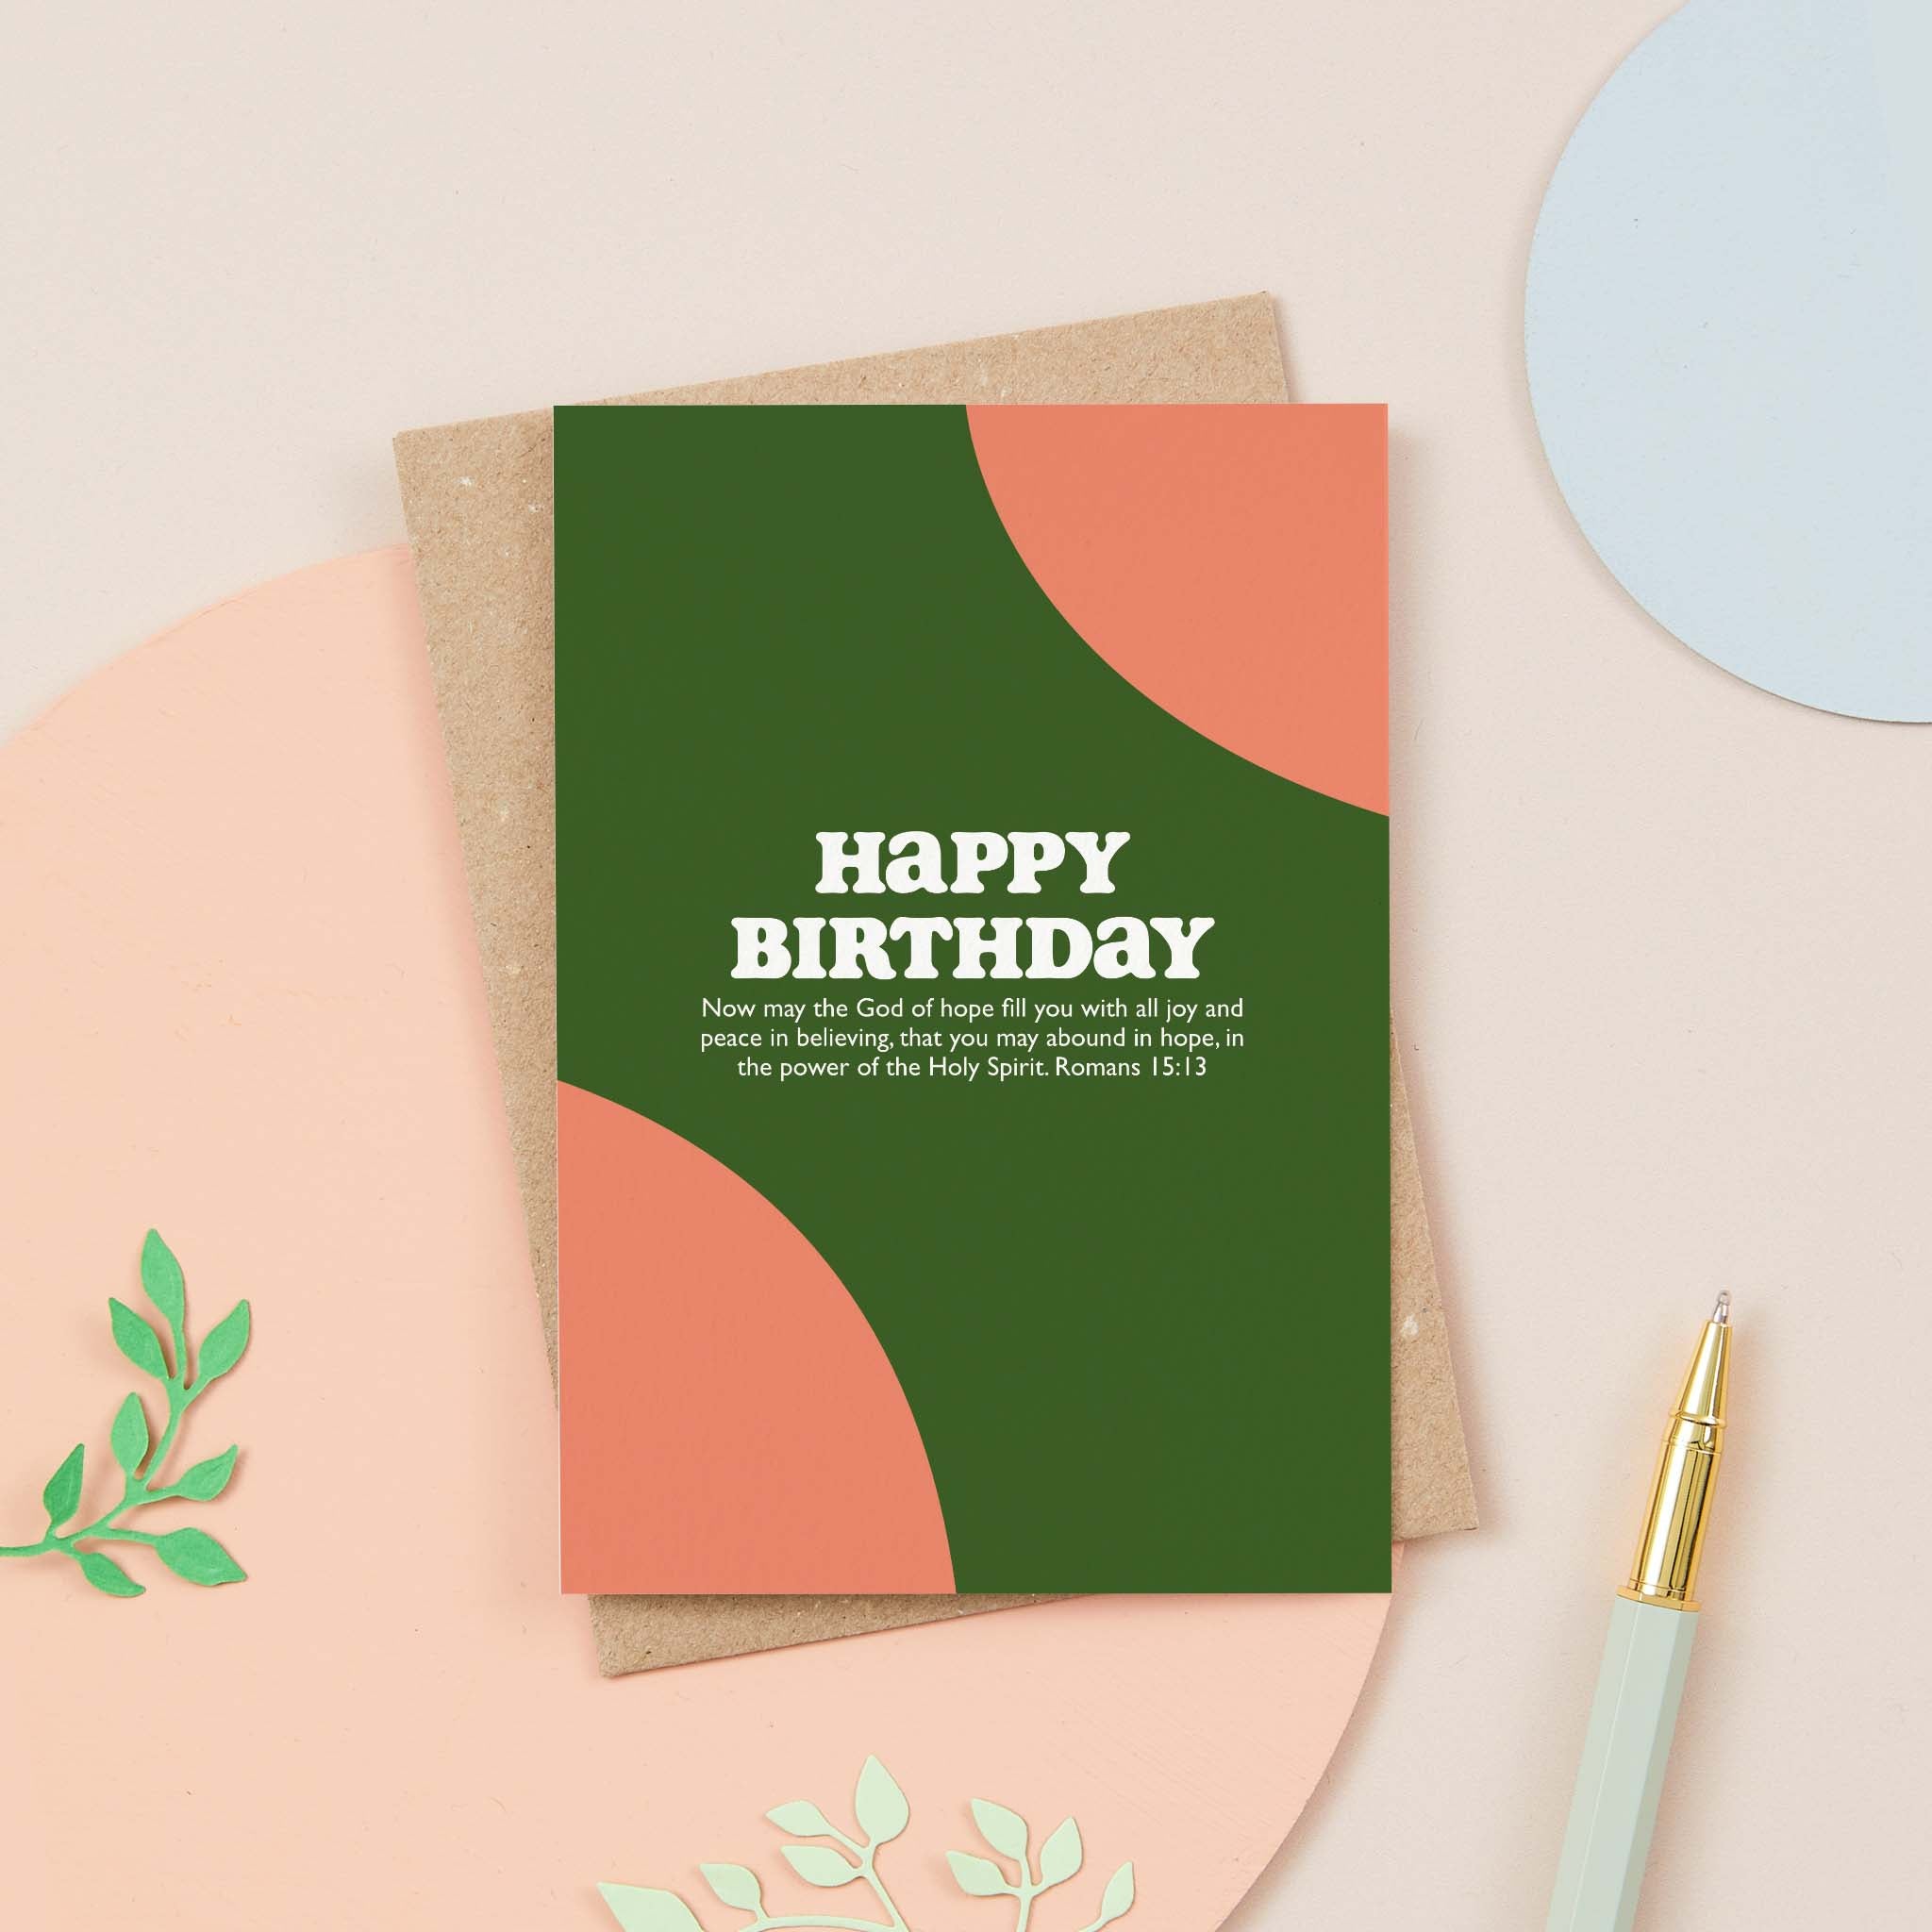 Colour Block Bible Verse Birthday Card - Romans 15:13 with recycled kraft envelope.